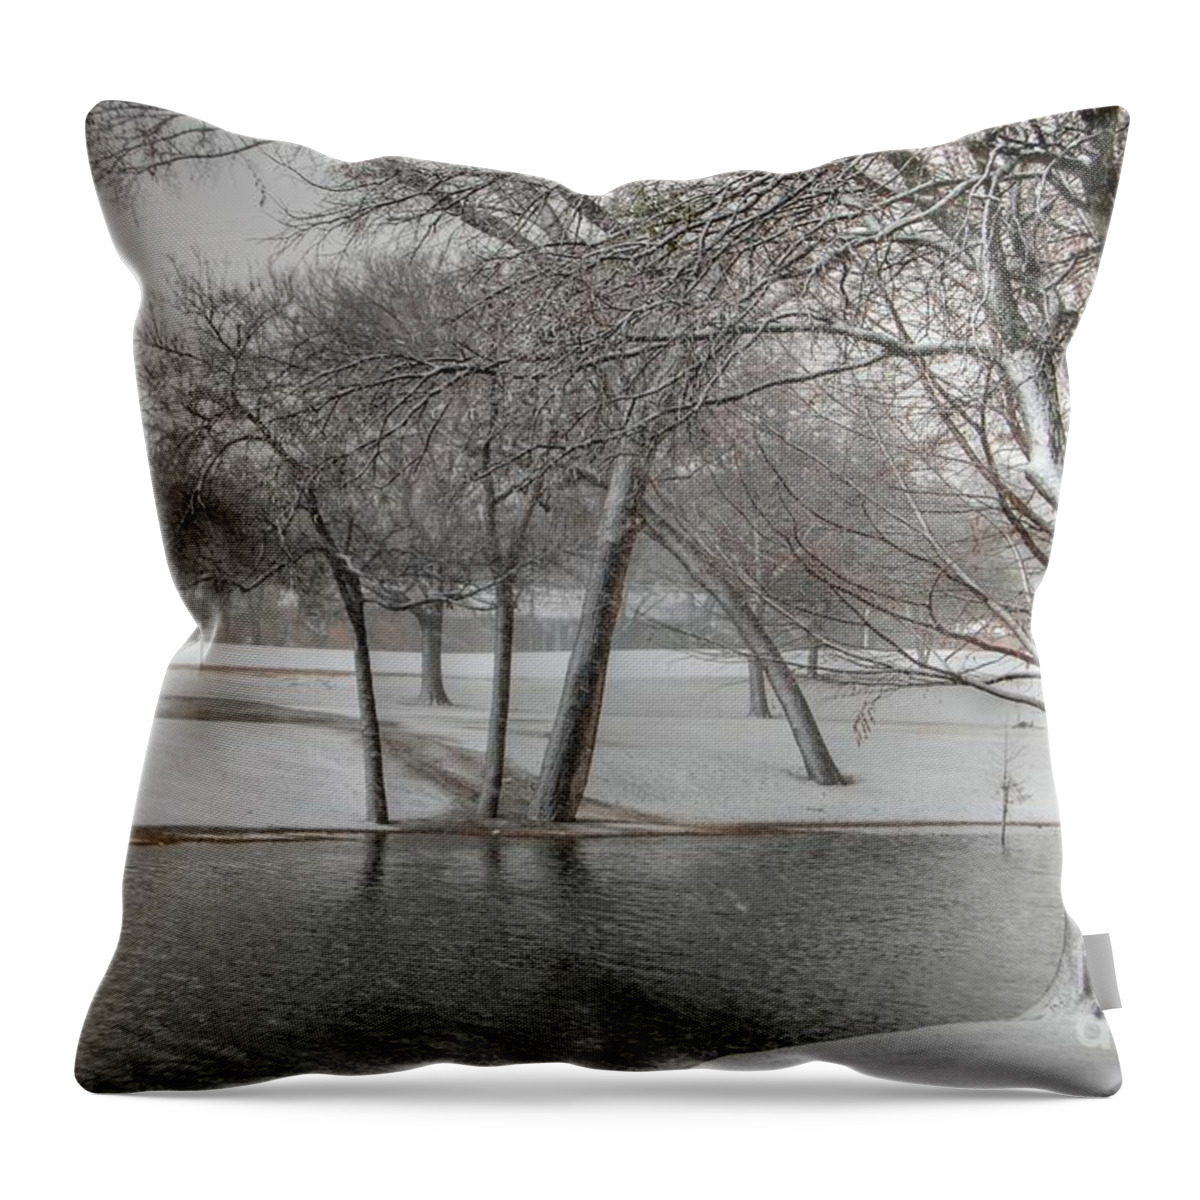 Parks Throw Pillow featuring the photograph Cottonwood Park Winter 2 by Bill Hamilton